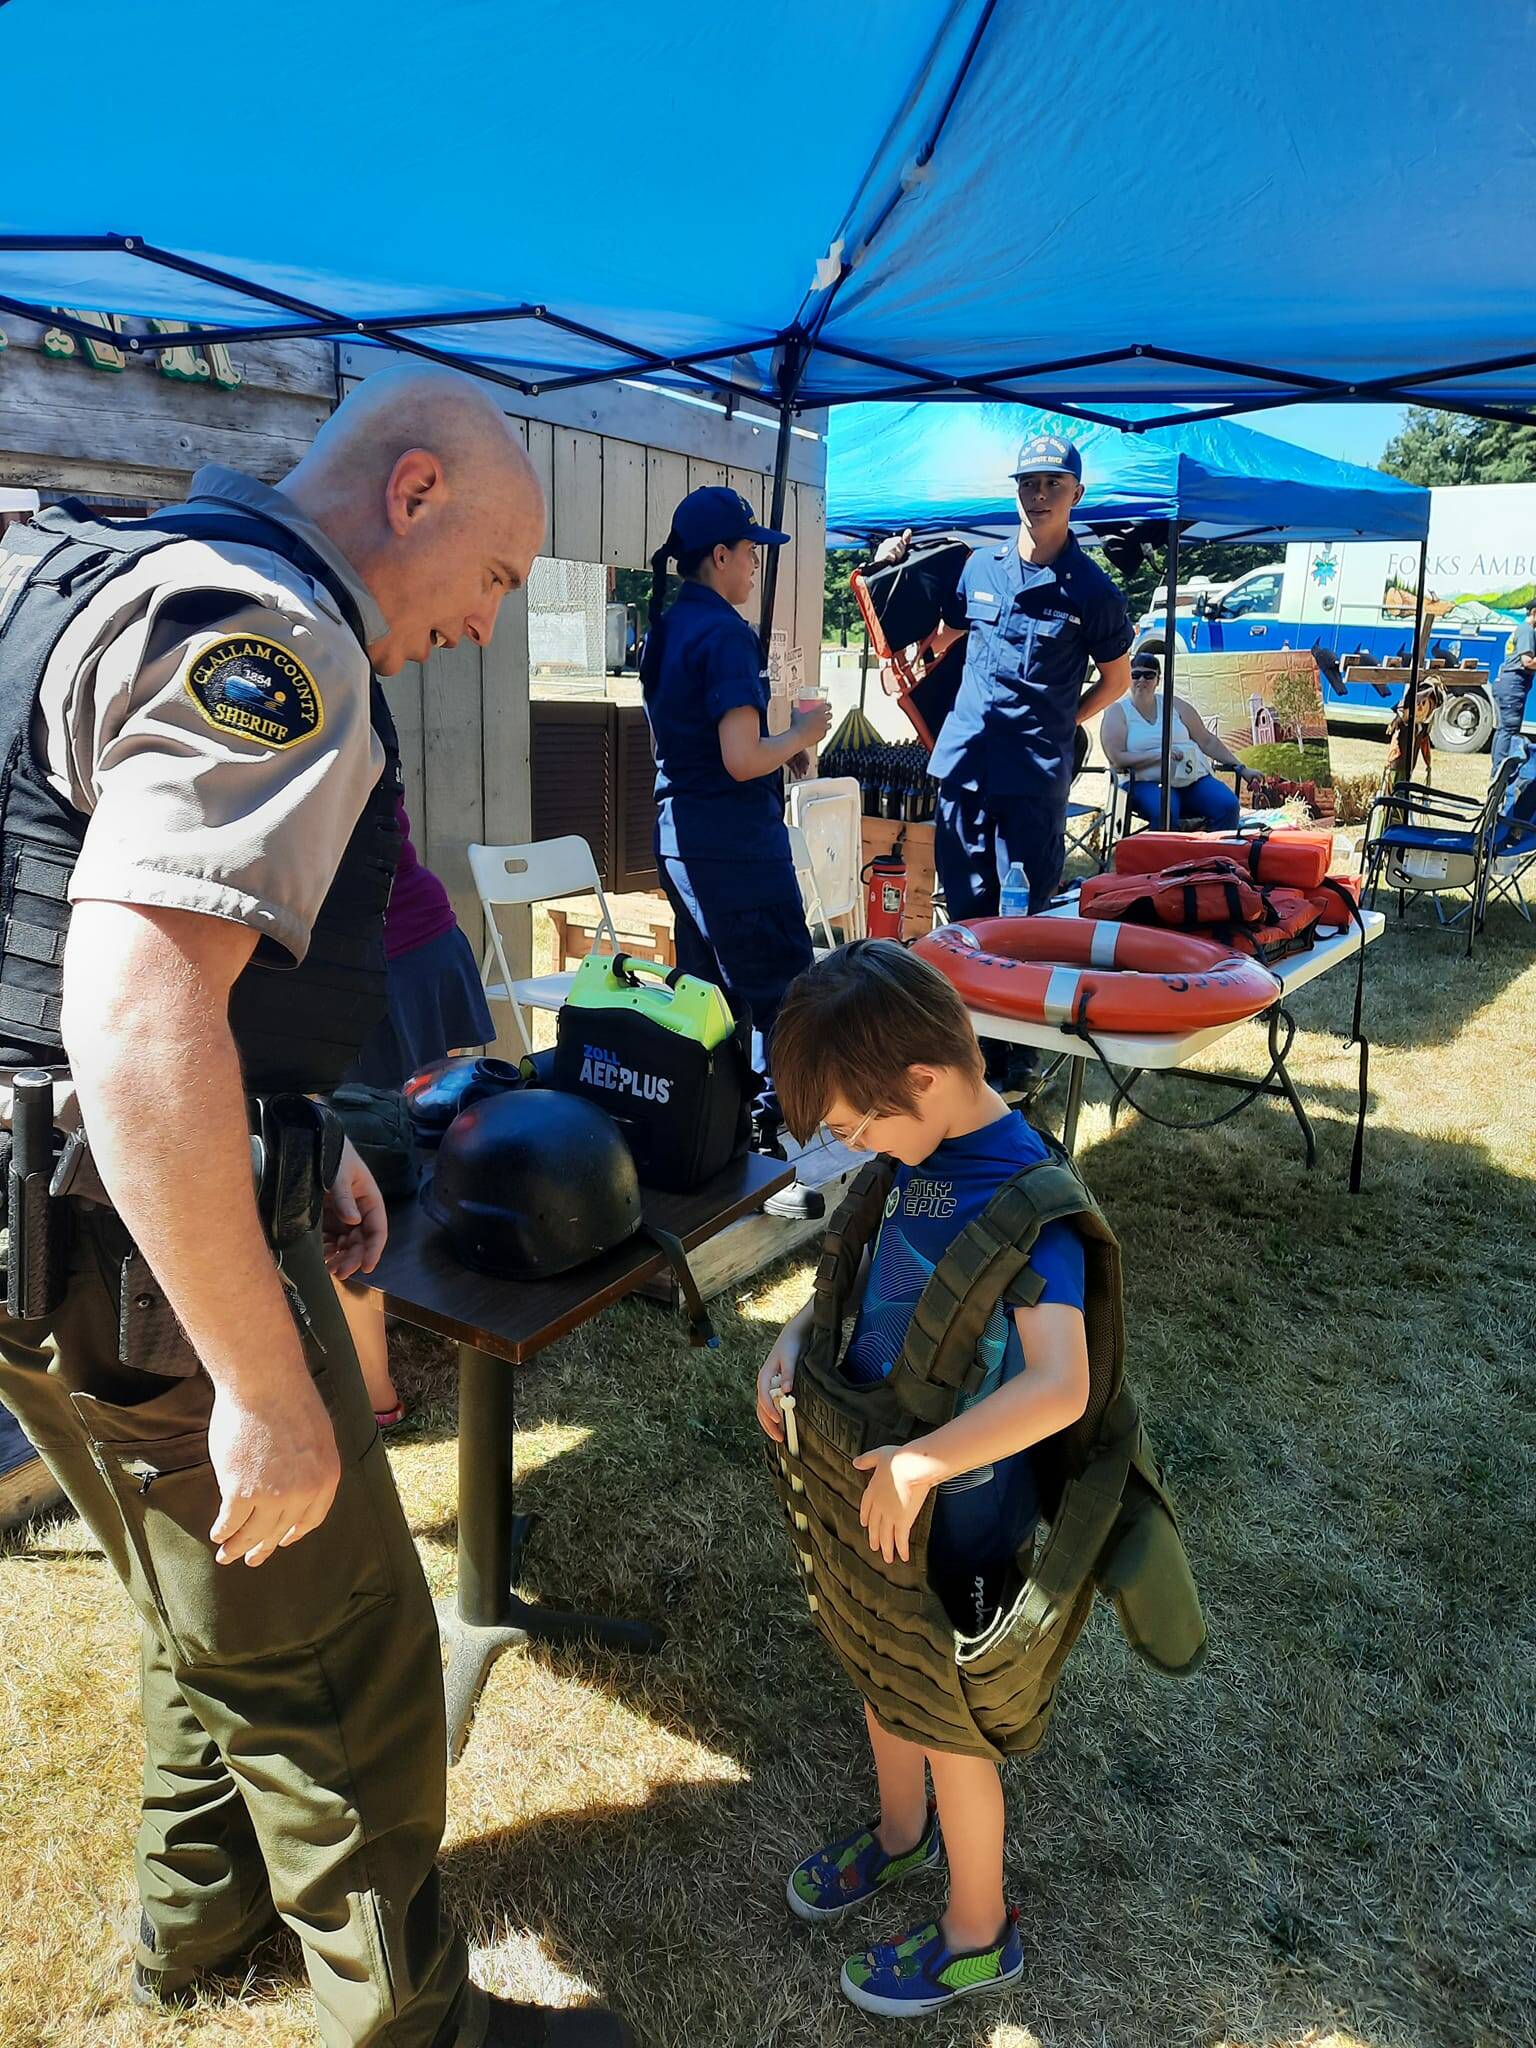 Sean Hoban with the Clallam County Sheriff’s Office offered a vest demonstration to those that wanted to try it on. Hoban was also strategically placed next to the Bank and the Jail.
 USCG Station Quillayute River members, seen in the background, also participated, with a lifevest demonstration.